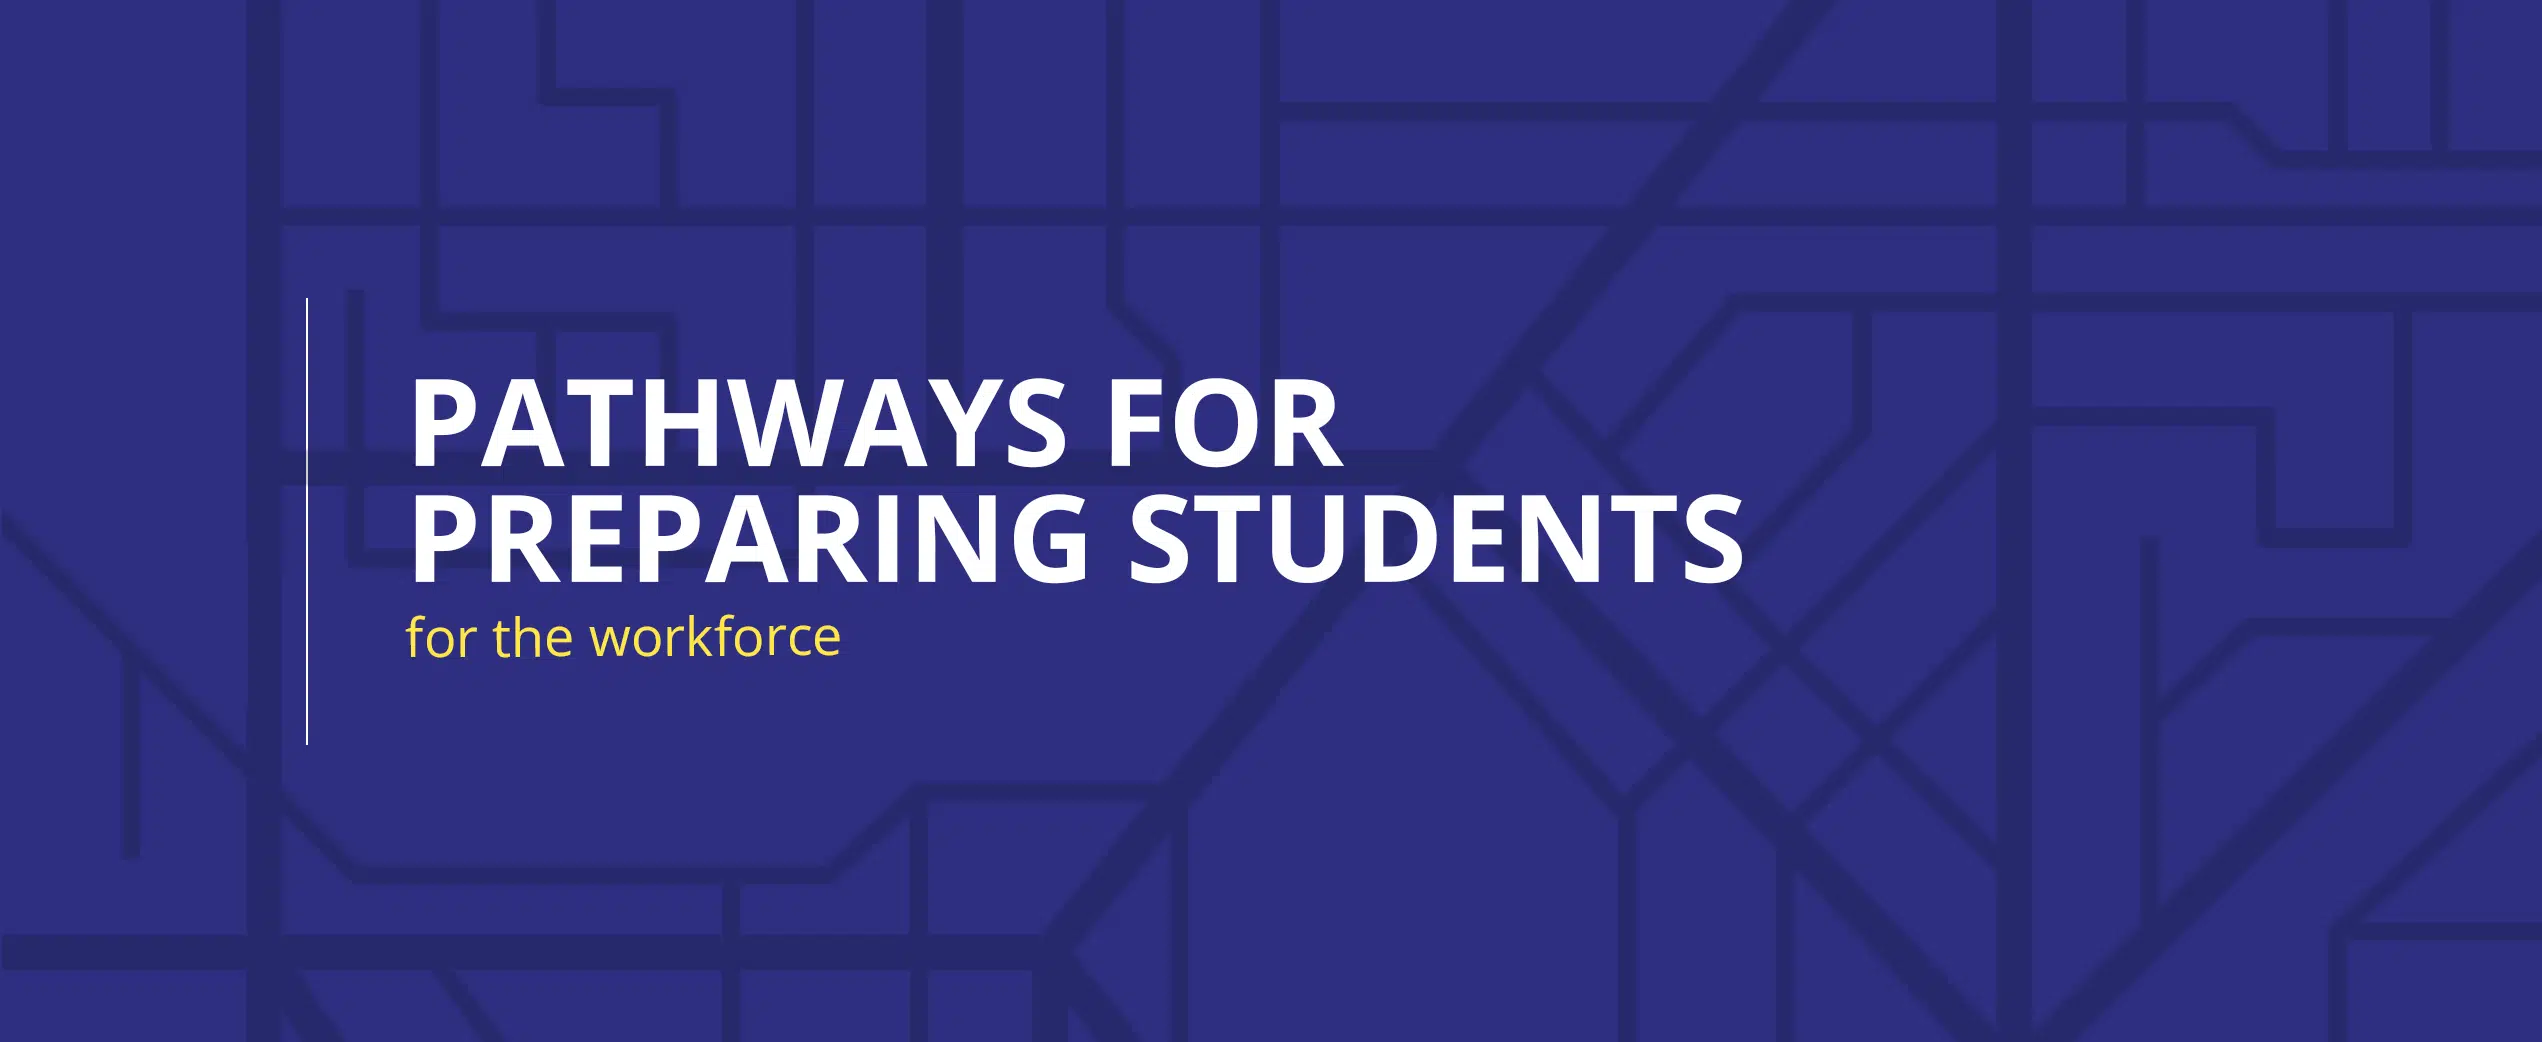 Pathways for preparing students for the workforce